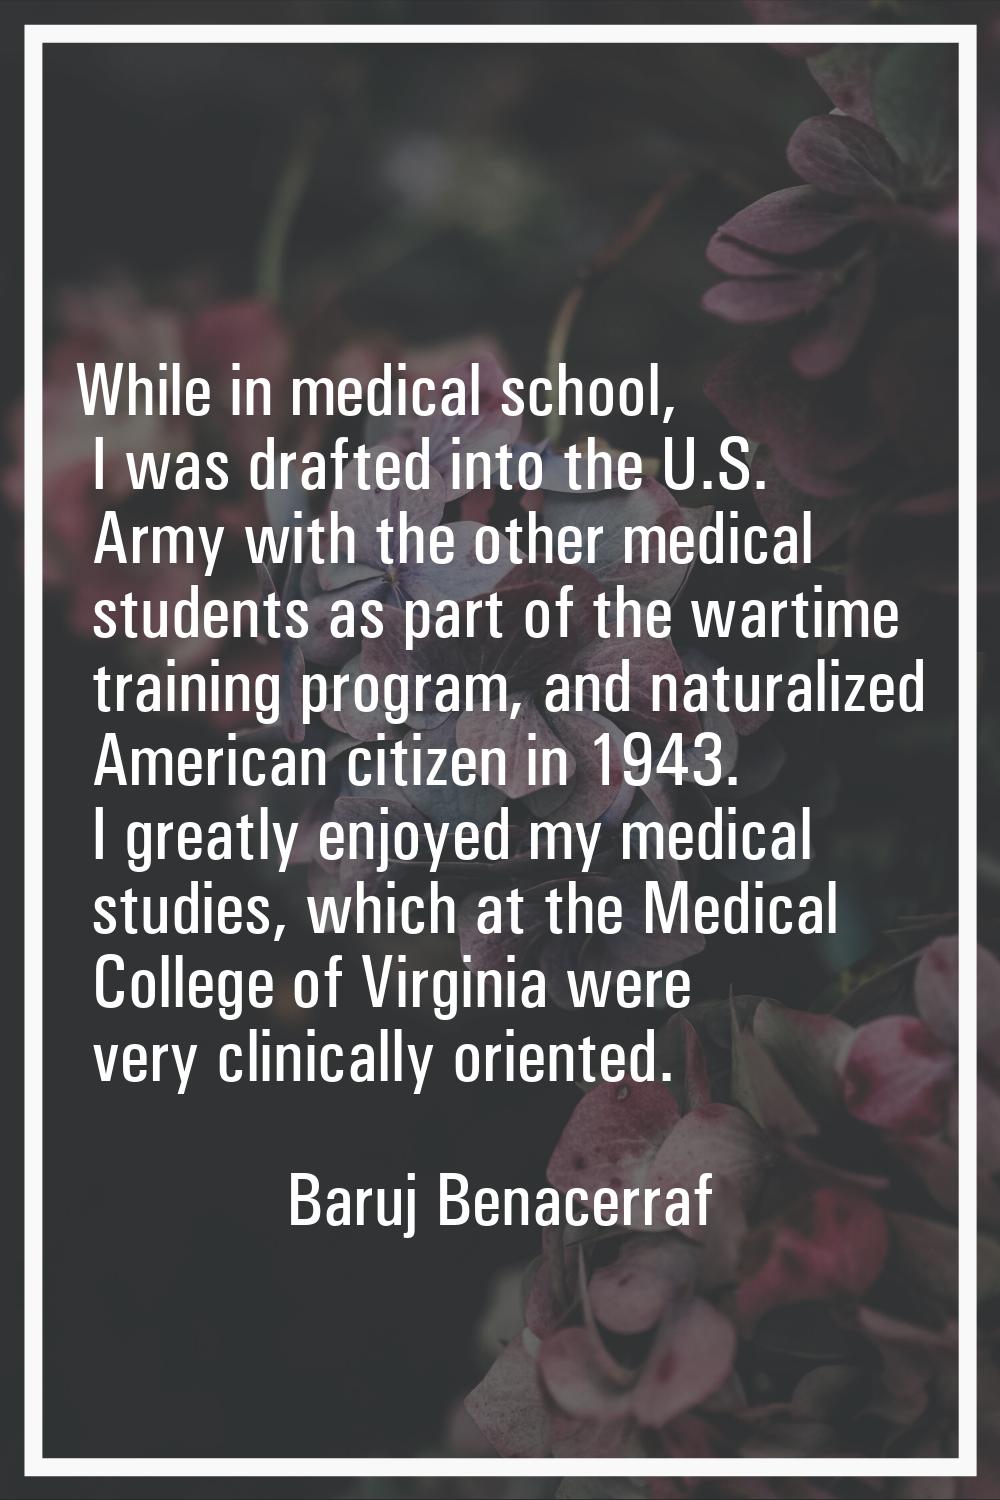 While in medical school, I was drafted into the U.S. Army with the other medical students as part o